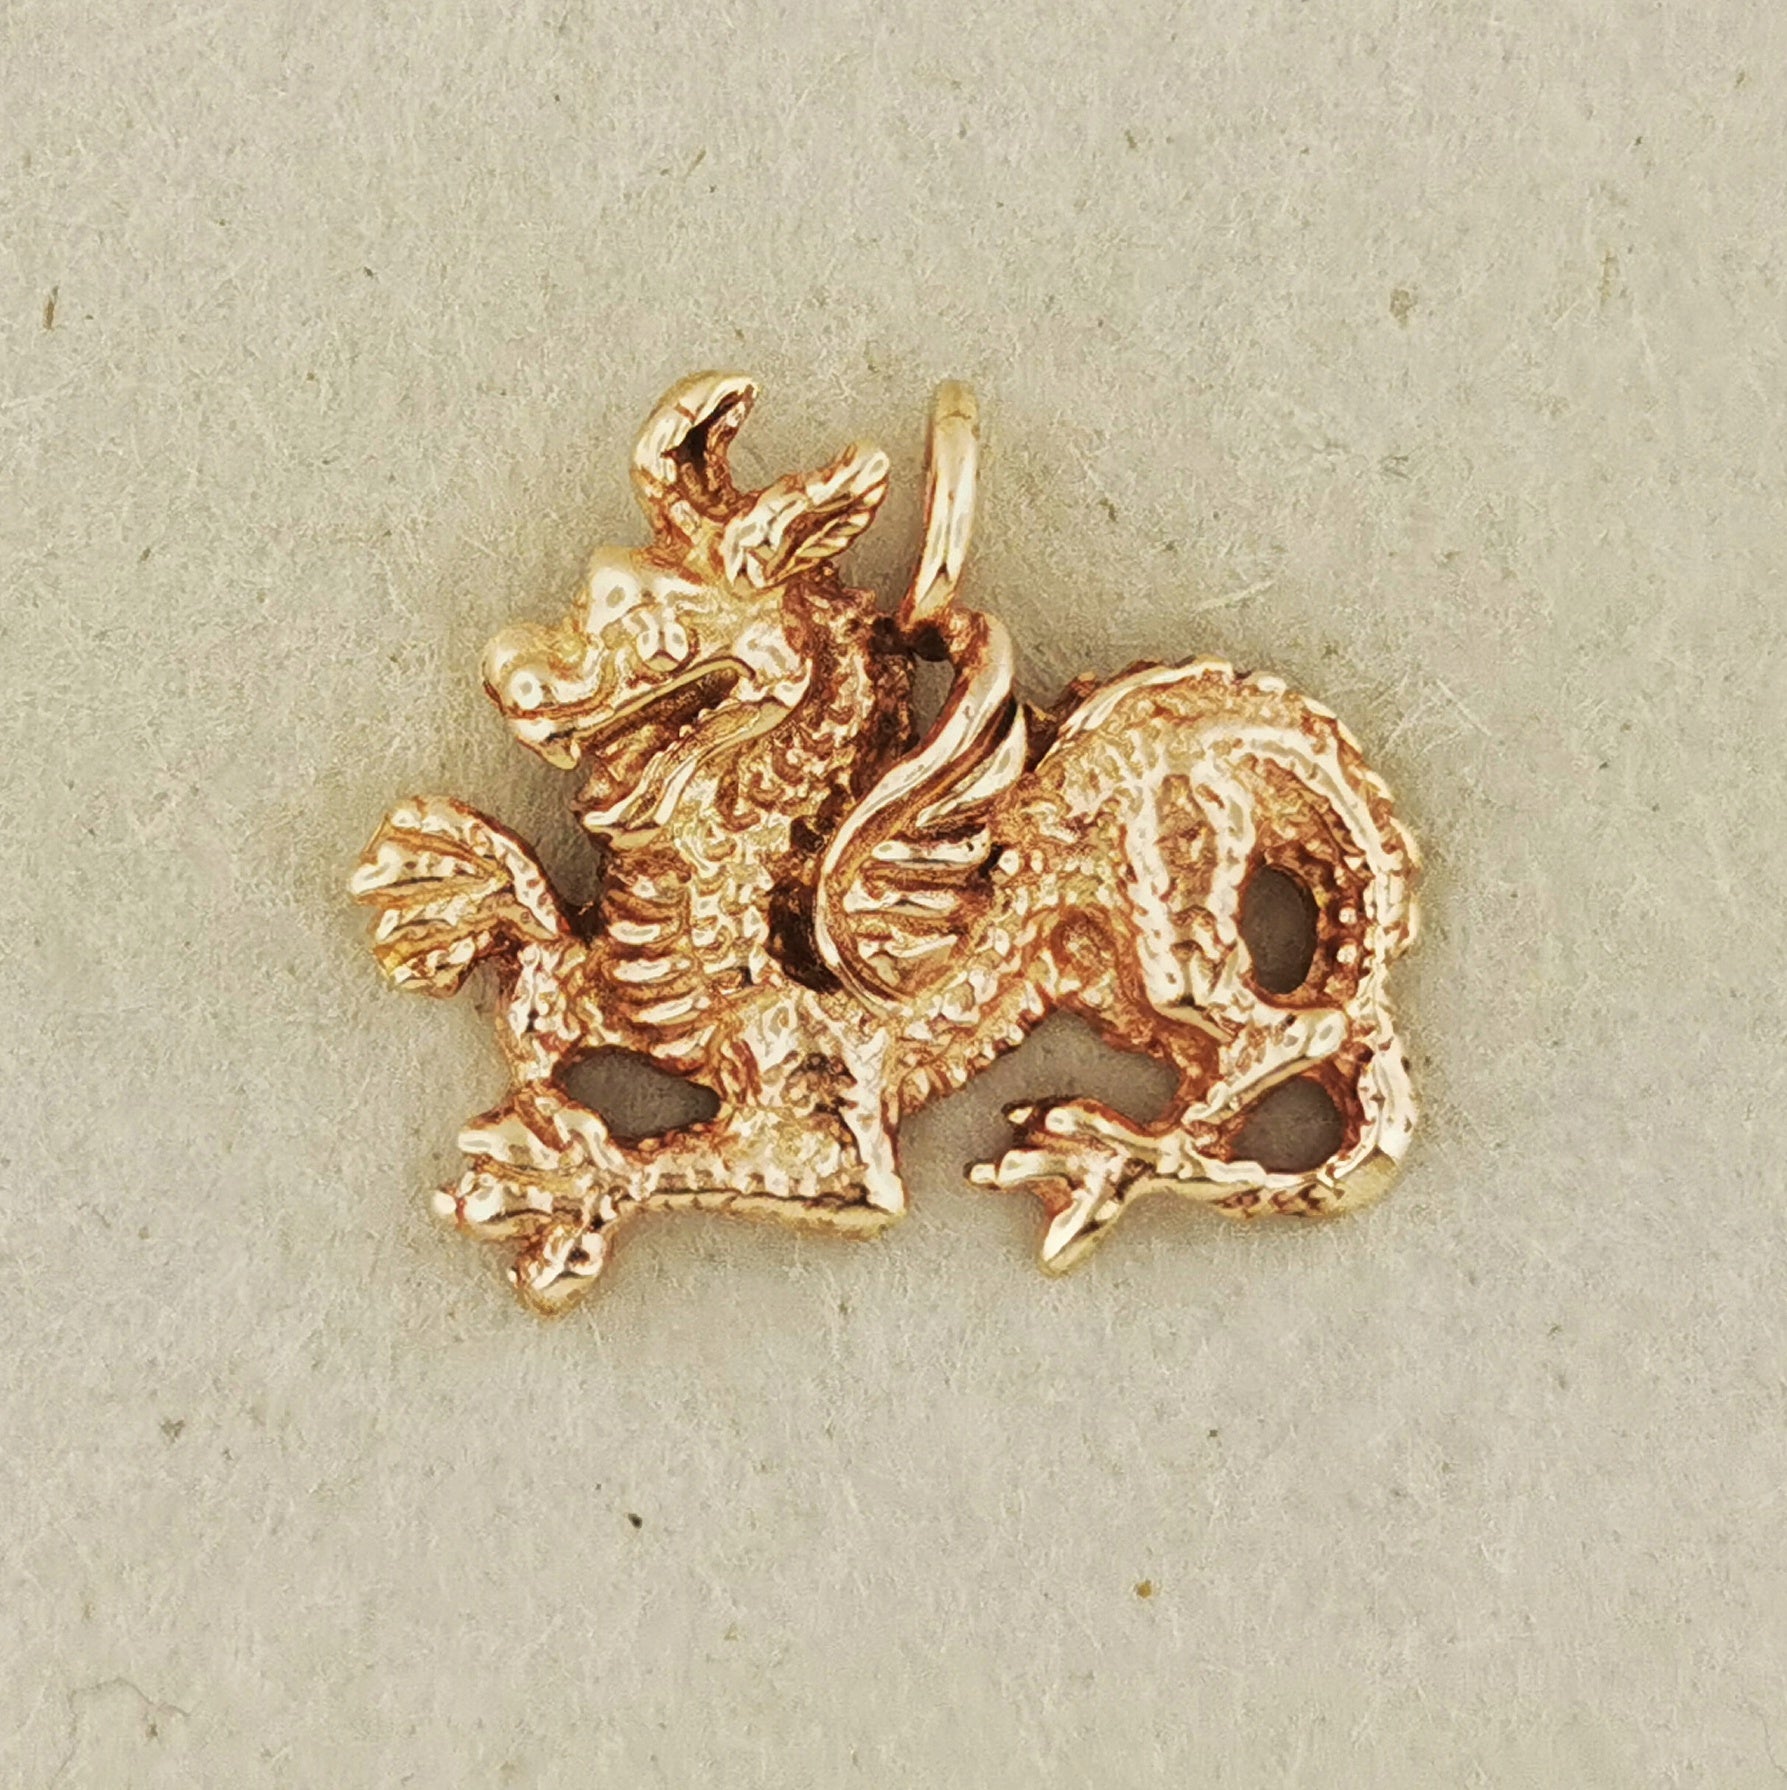 Medieval Dragon Charm in Sterling Silver or Antique Bronze, Dragon Lover Jewelry, Dragon Lover Jewellery, Here Be Dragons, Year Of The Dragon Jewelry, Year Of The Dragon Jewellery, Medieval Dragon Pendant, Bronze Dragon Pendant, Bronze Dragon Necklace, Bronze Dragon Charm, Antique Bronze Dragon Pendant